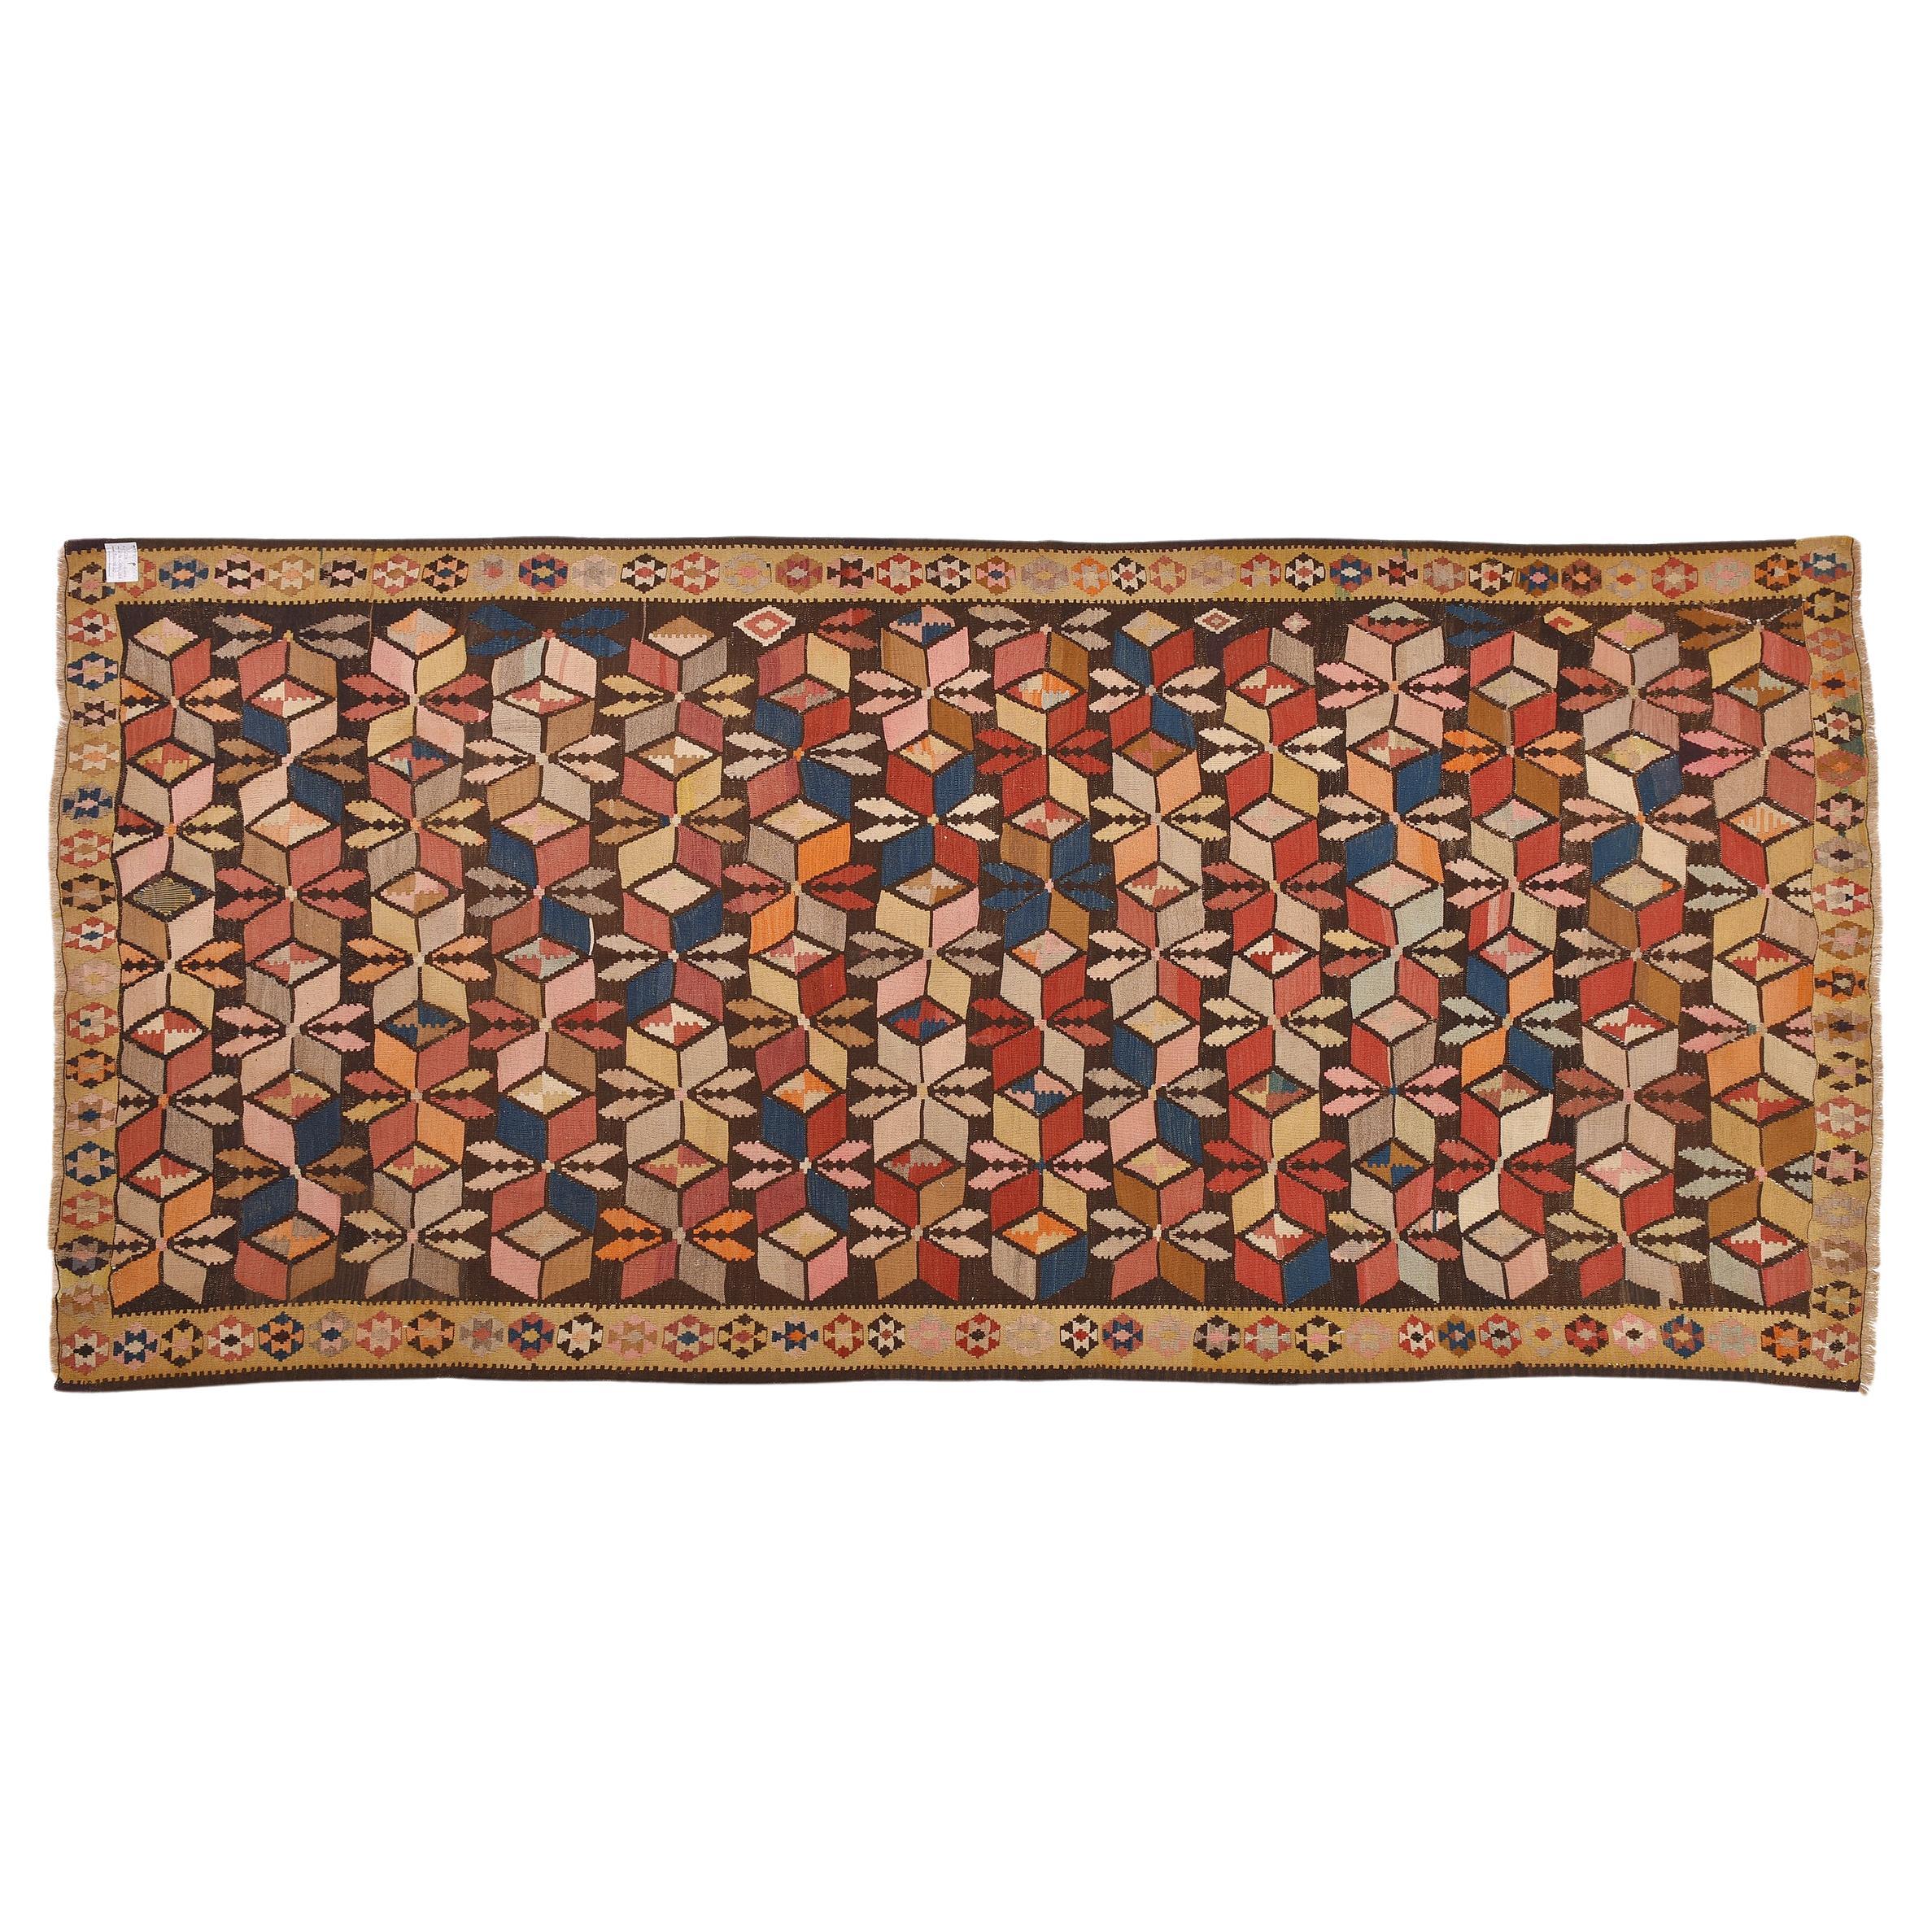 nr. 128 - Ancient Caucasian kilim particularly interesting for its design and colours.
Those who know the technique of weaving carpets and kilims know how difficult it is to create this type of decoration on a loom, on a fine blue background in this